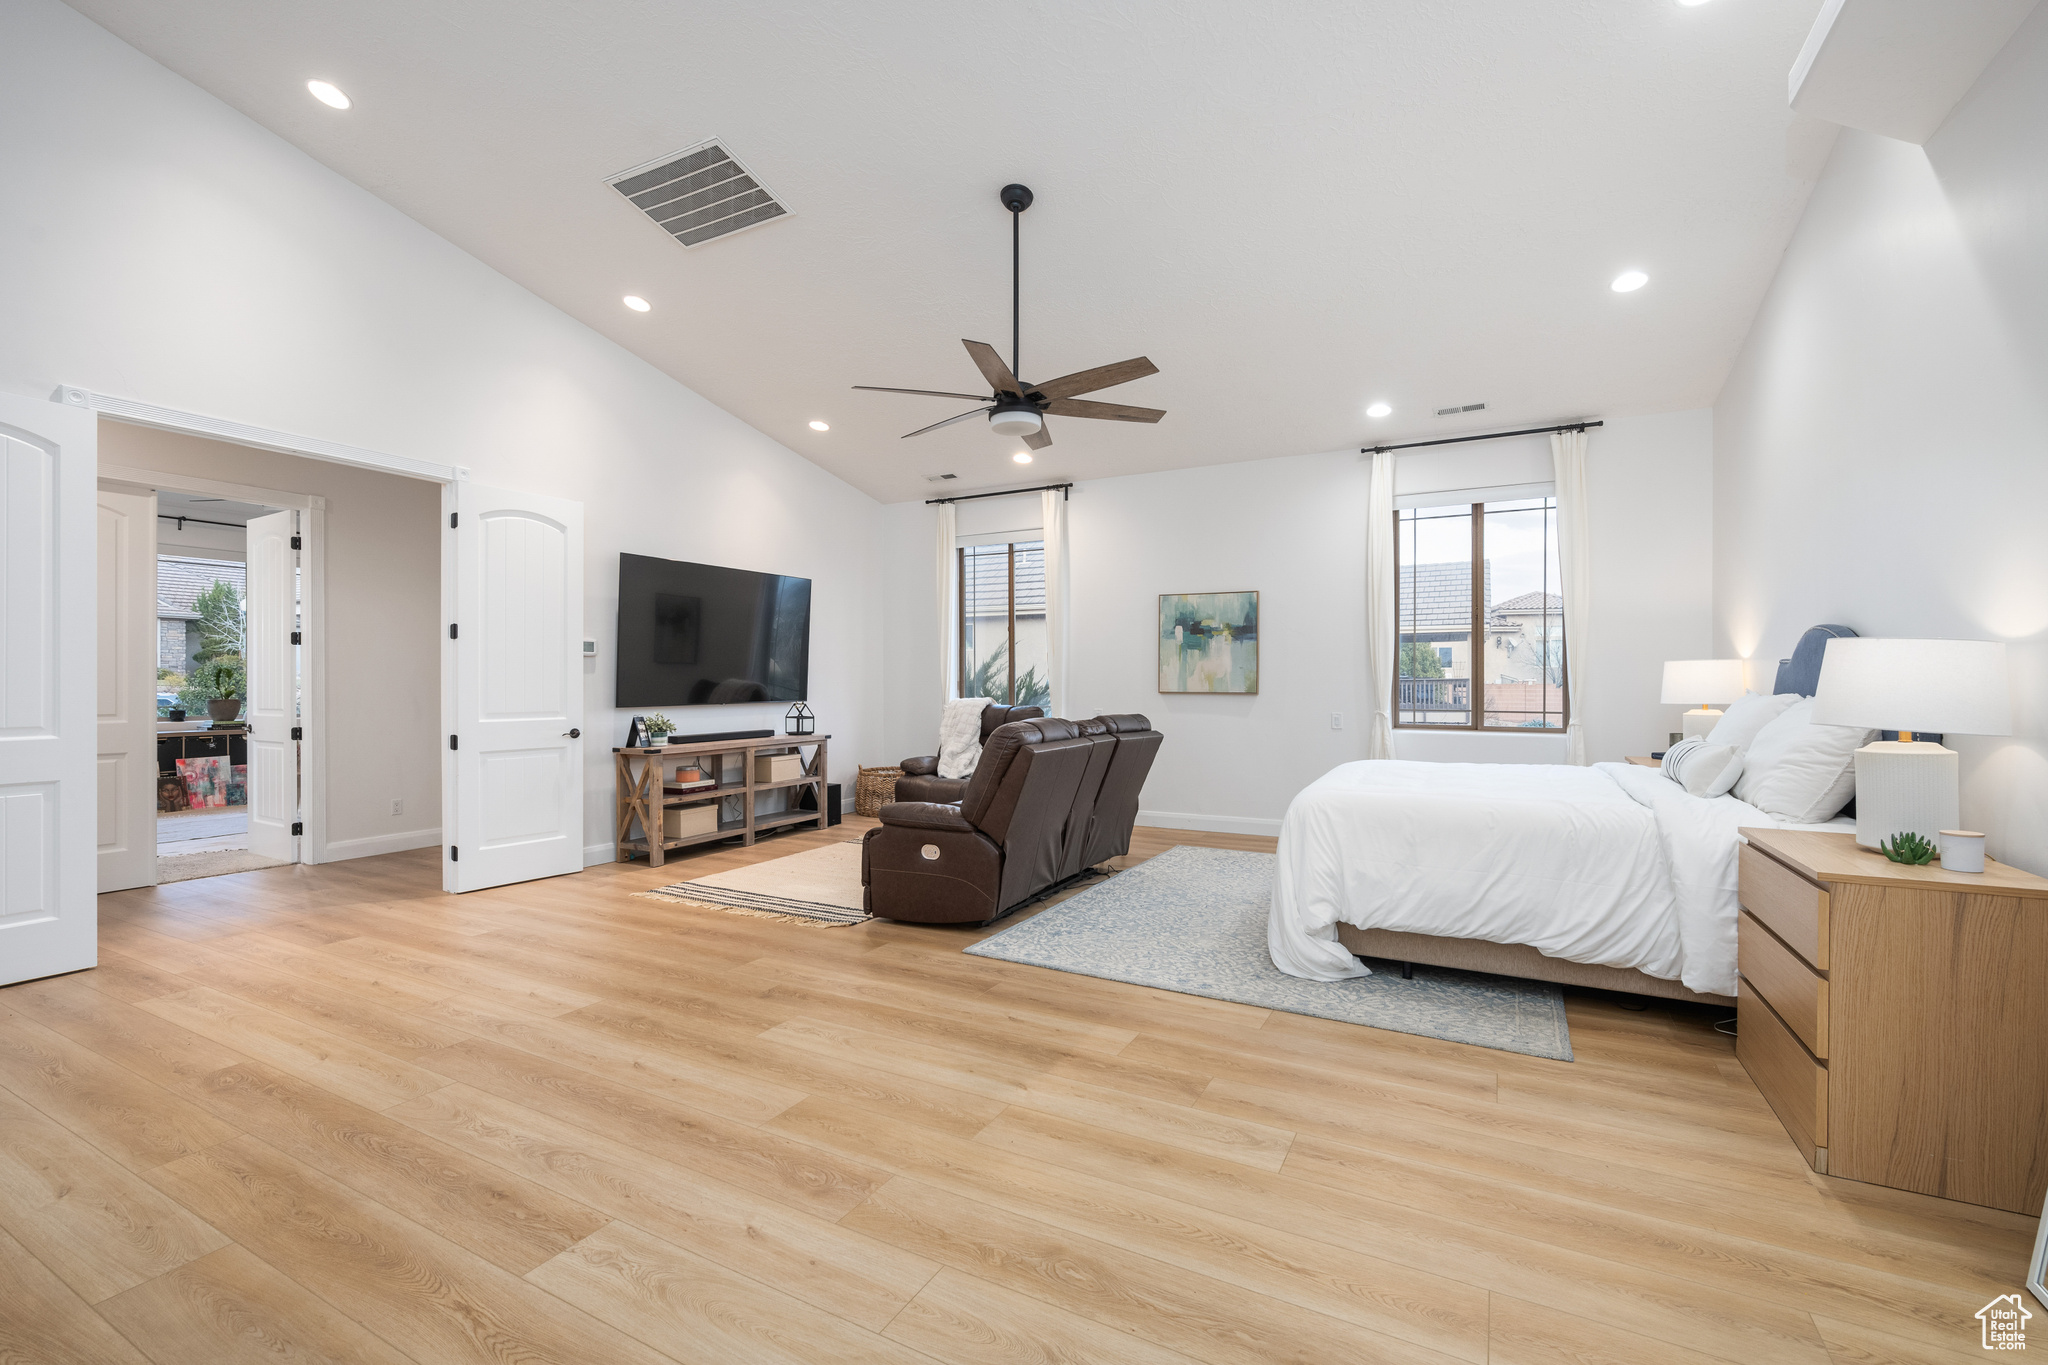 Bedroom featuring access to exterior, ceiling fan, multiple windows, and light hardwood / wood-style floors